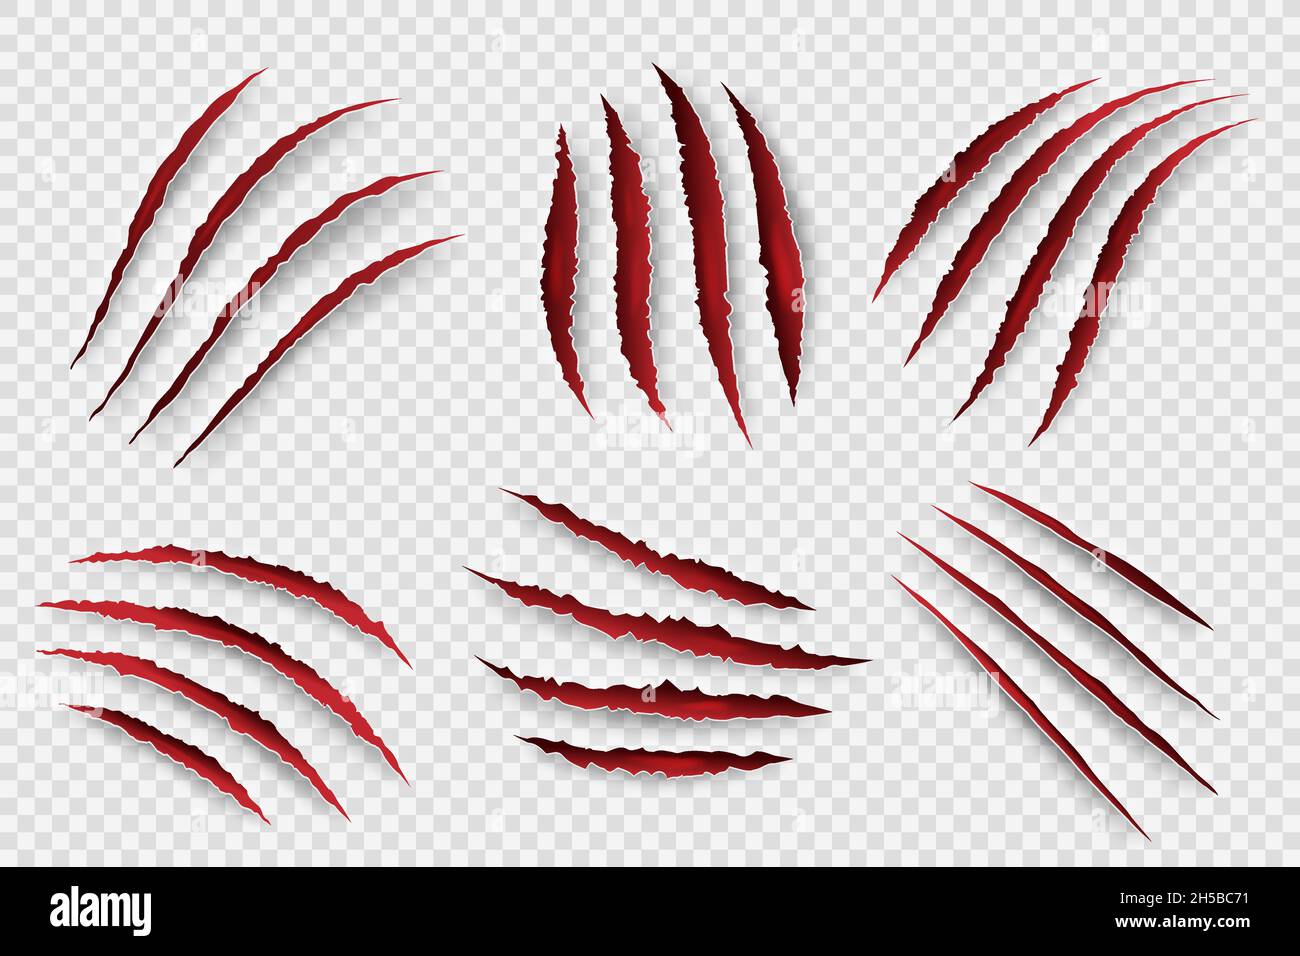 Tiger scratches. Danger scary claw symbols for horrors monster paws with blood shapes decent vector set Stock Vector